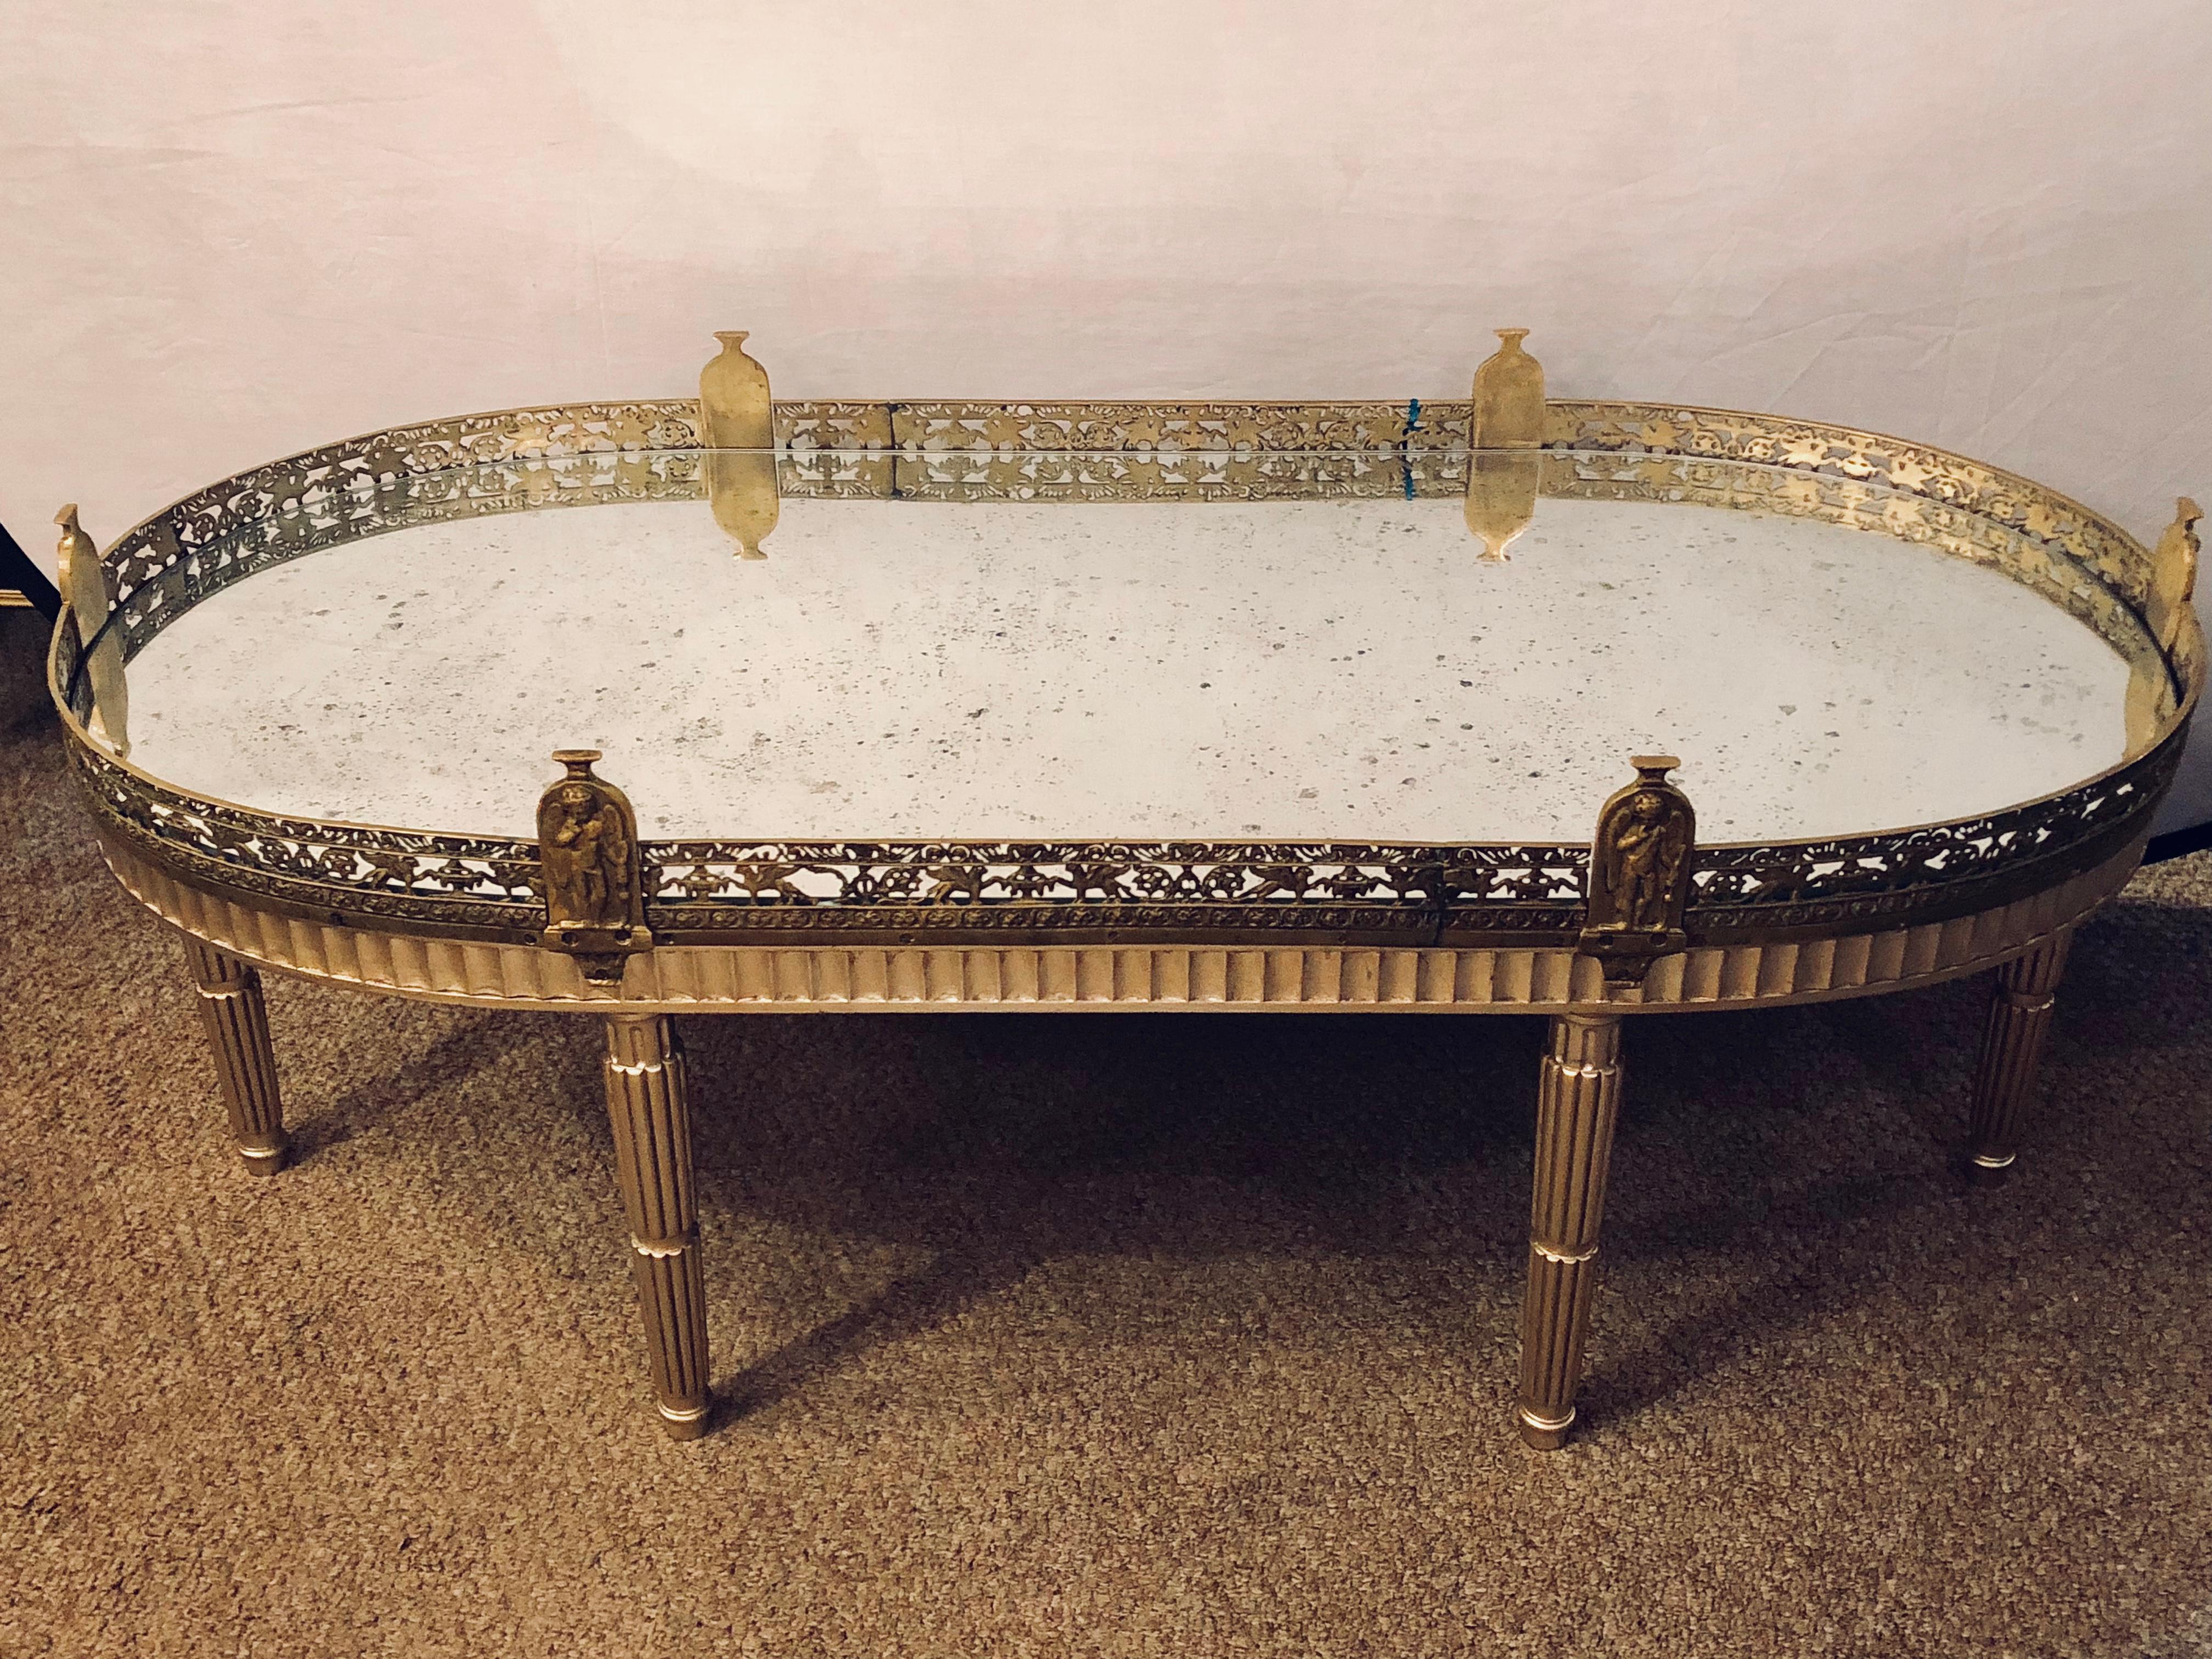 Hollywood Regency plateau style coffee table in Louis XVI manner finished in a silver gilt. Stunning silver form on a Louis XVI style base having a reeded apron with an antiqued mirror top set inside a bronze galleried frame. The bronze frame